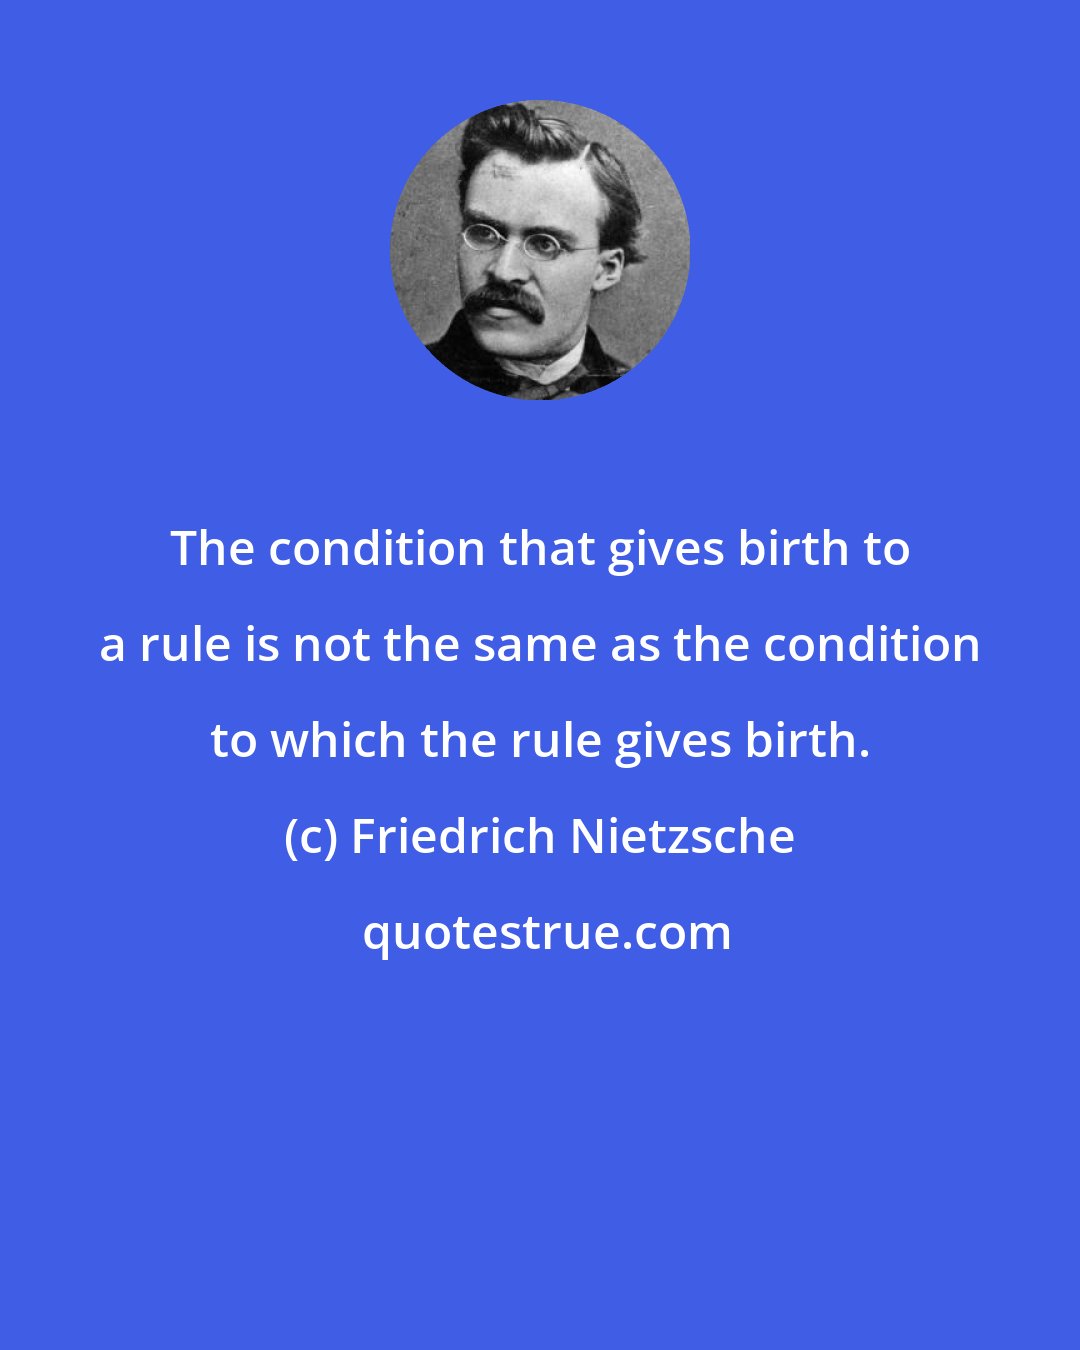 Friedrich Nietzsche: The condition that gives birth to a rule is not the same as the condition to which the rule gives birth.